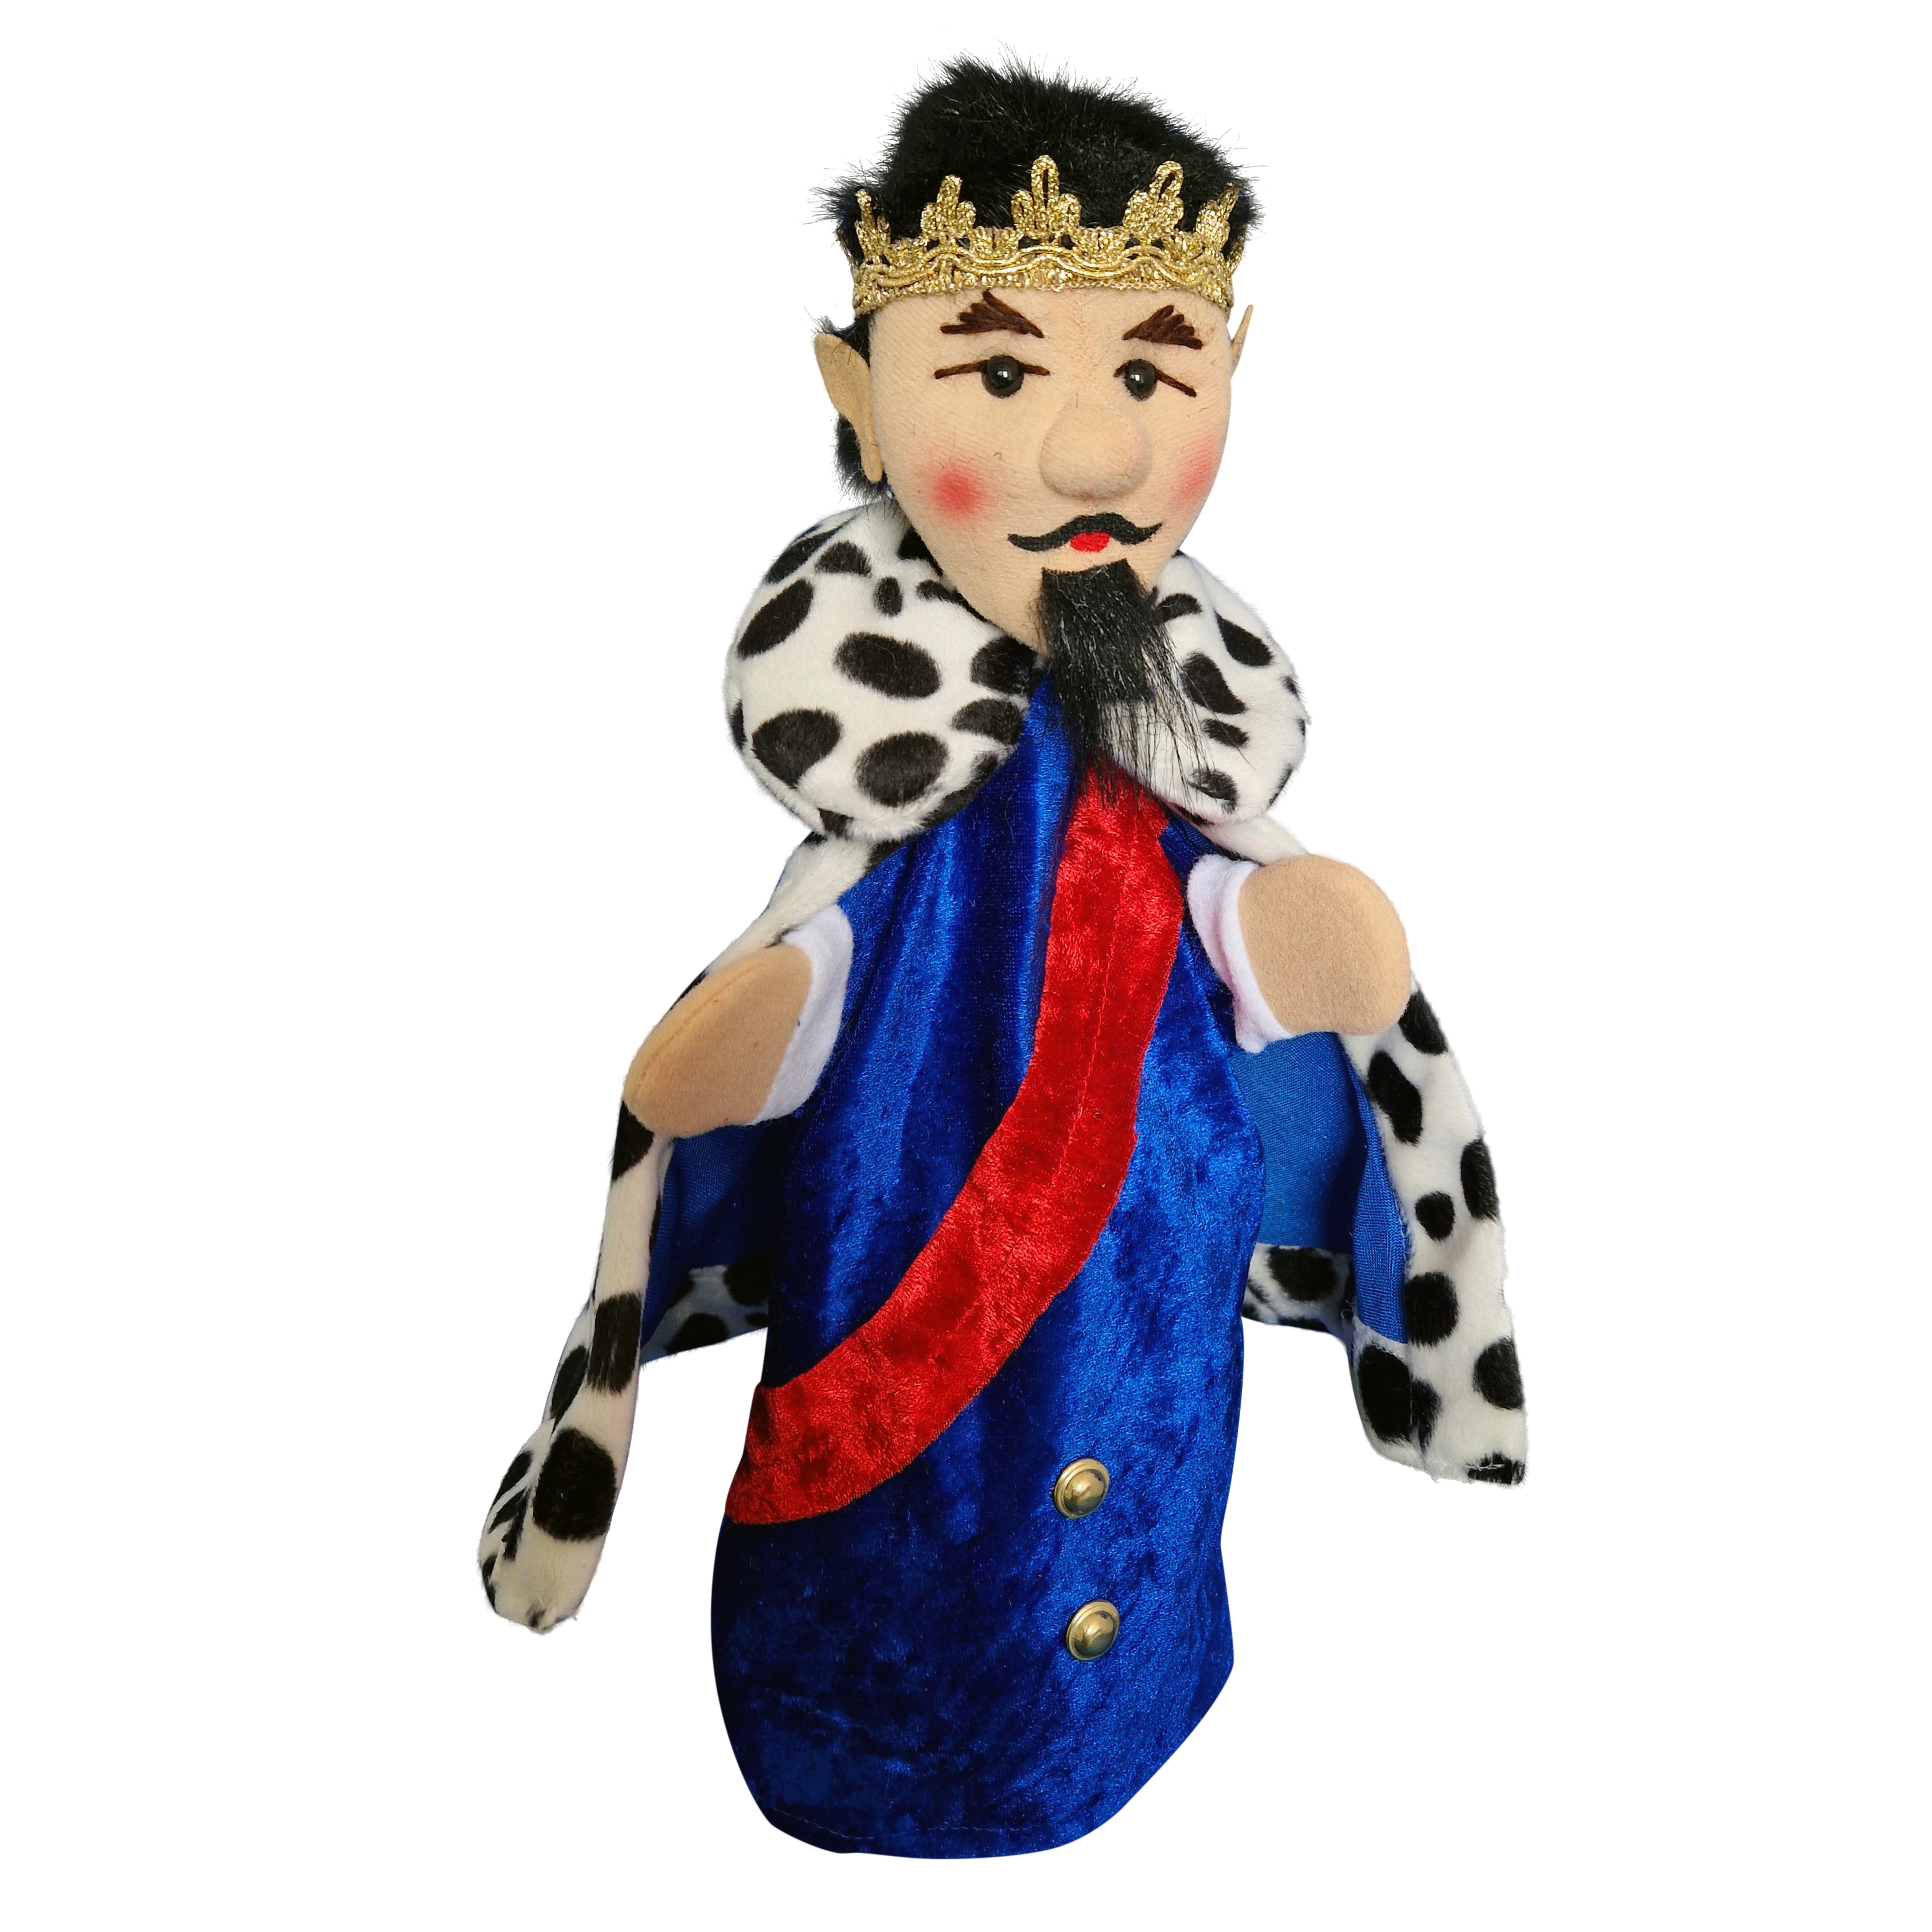 Hand puppet fairytale king - KERSA classic